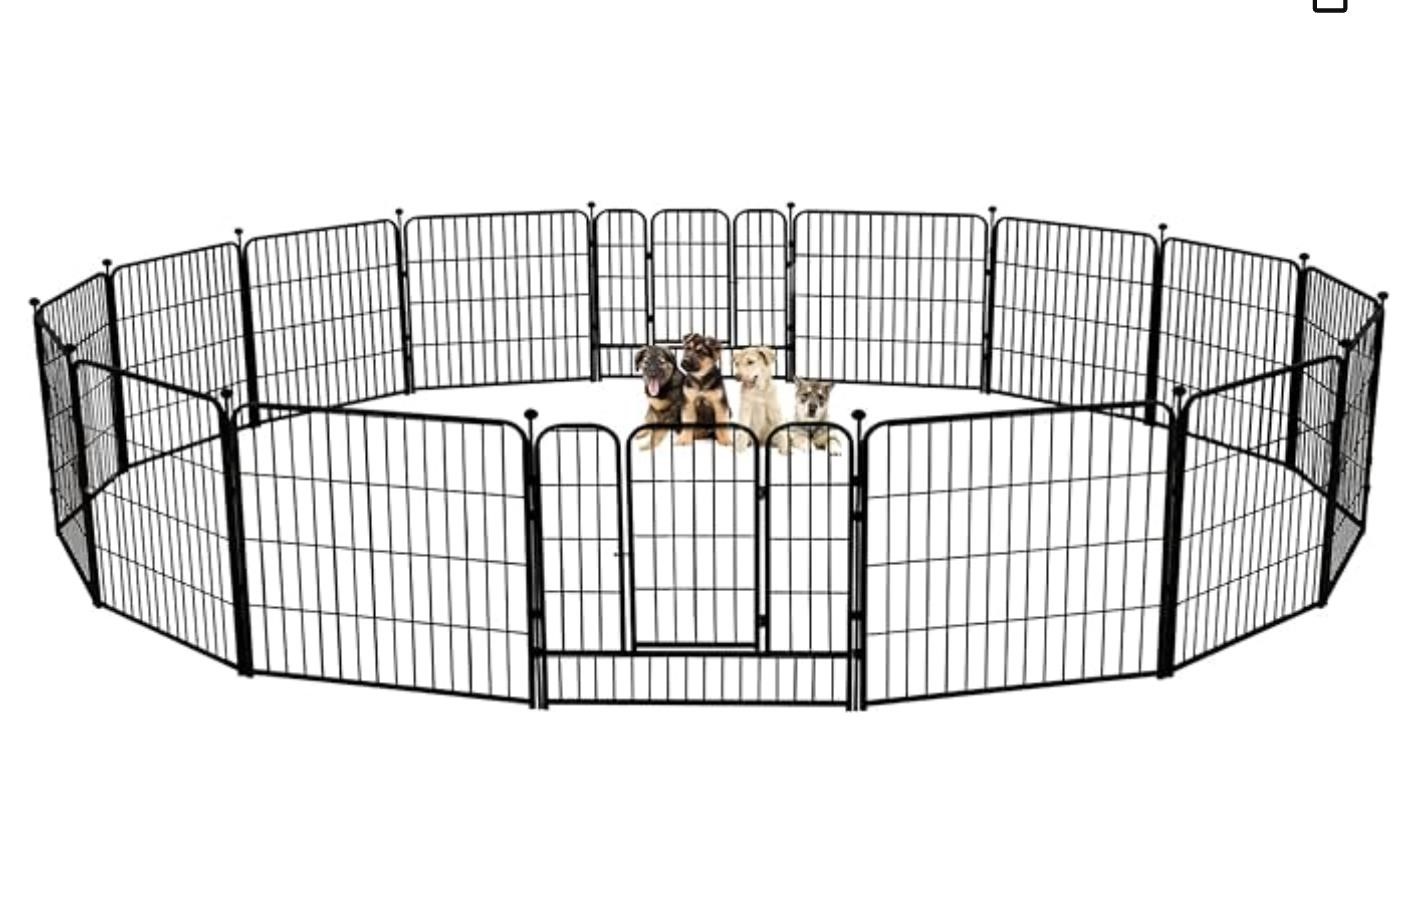 Seiyierr Metal Dog Fence for Camping, Foldable Do